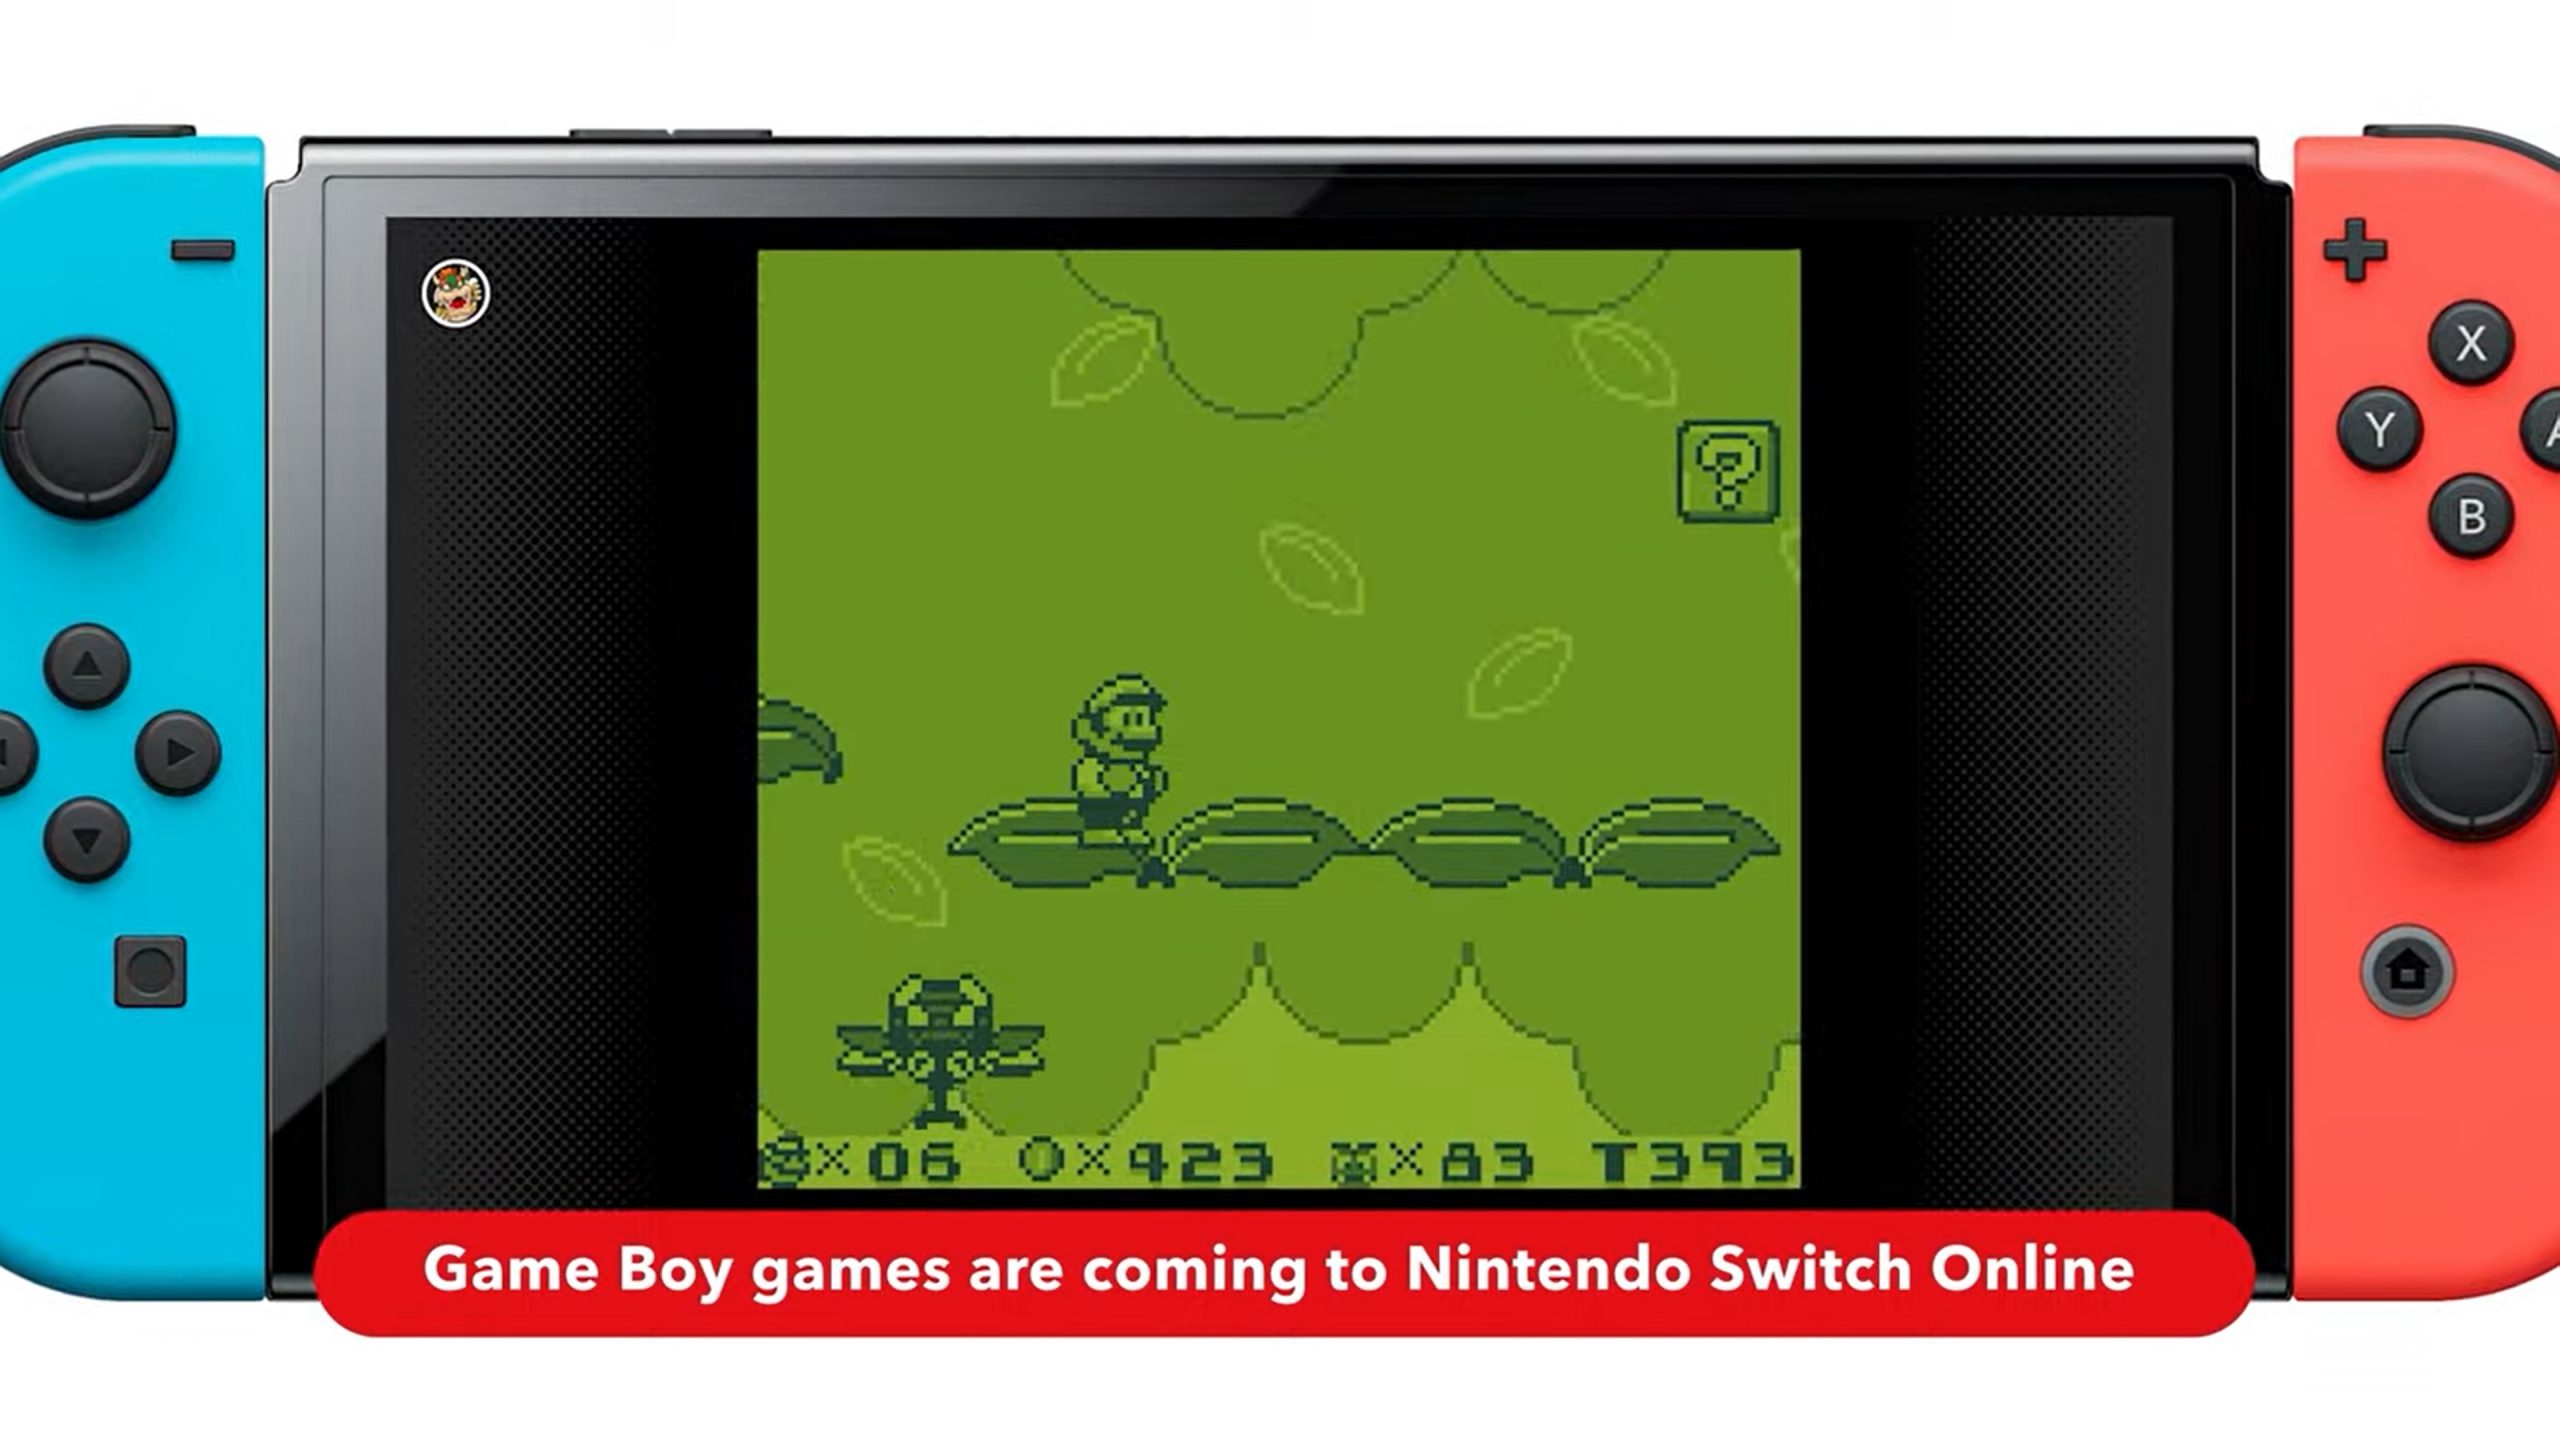 Is Gameboy coming to Nintendo Switch Online?